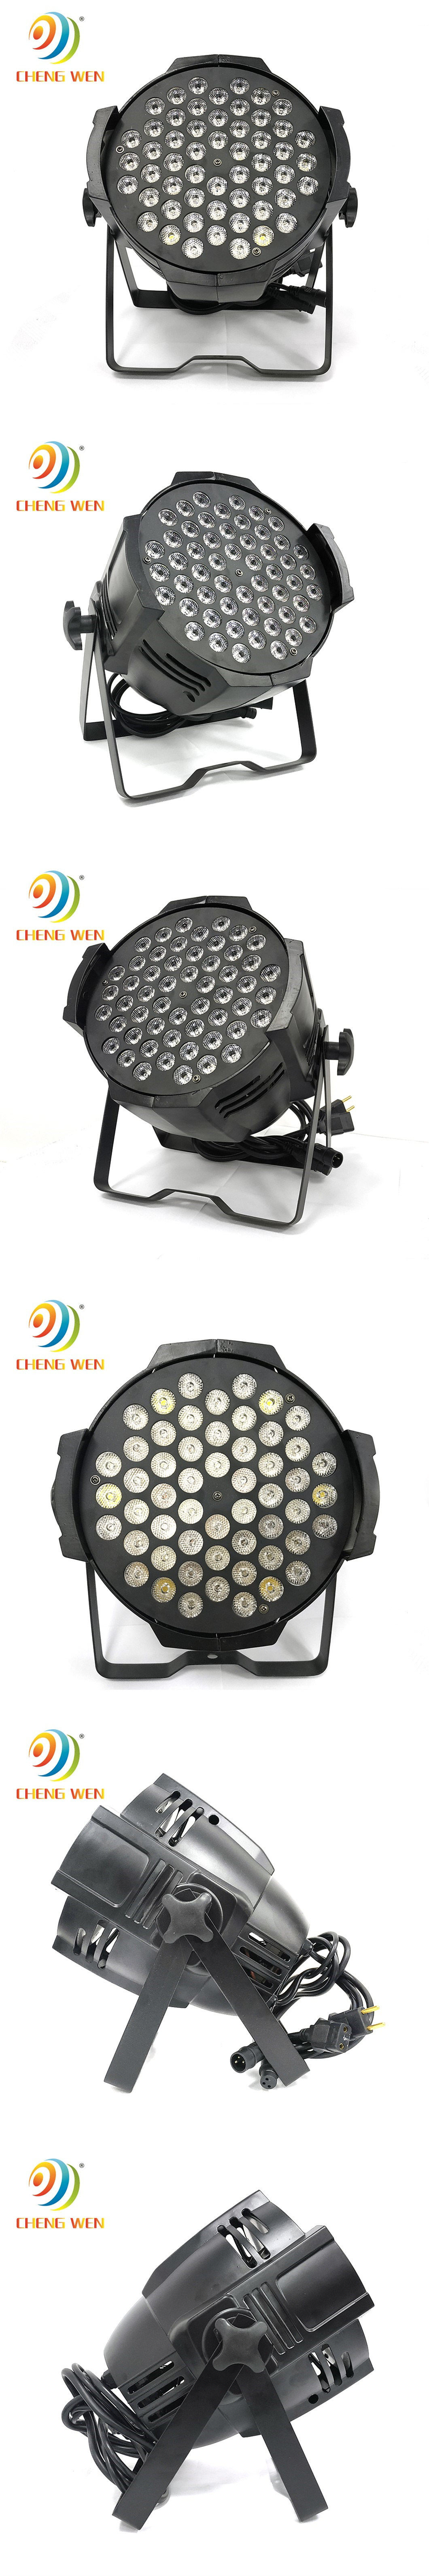 Wholesale DJ Special Stage PAR Light Outdoor Waterproof IP67 RGBW 54*3W for Party